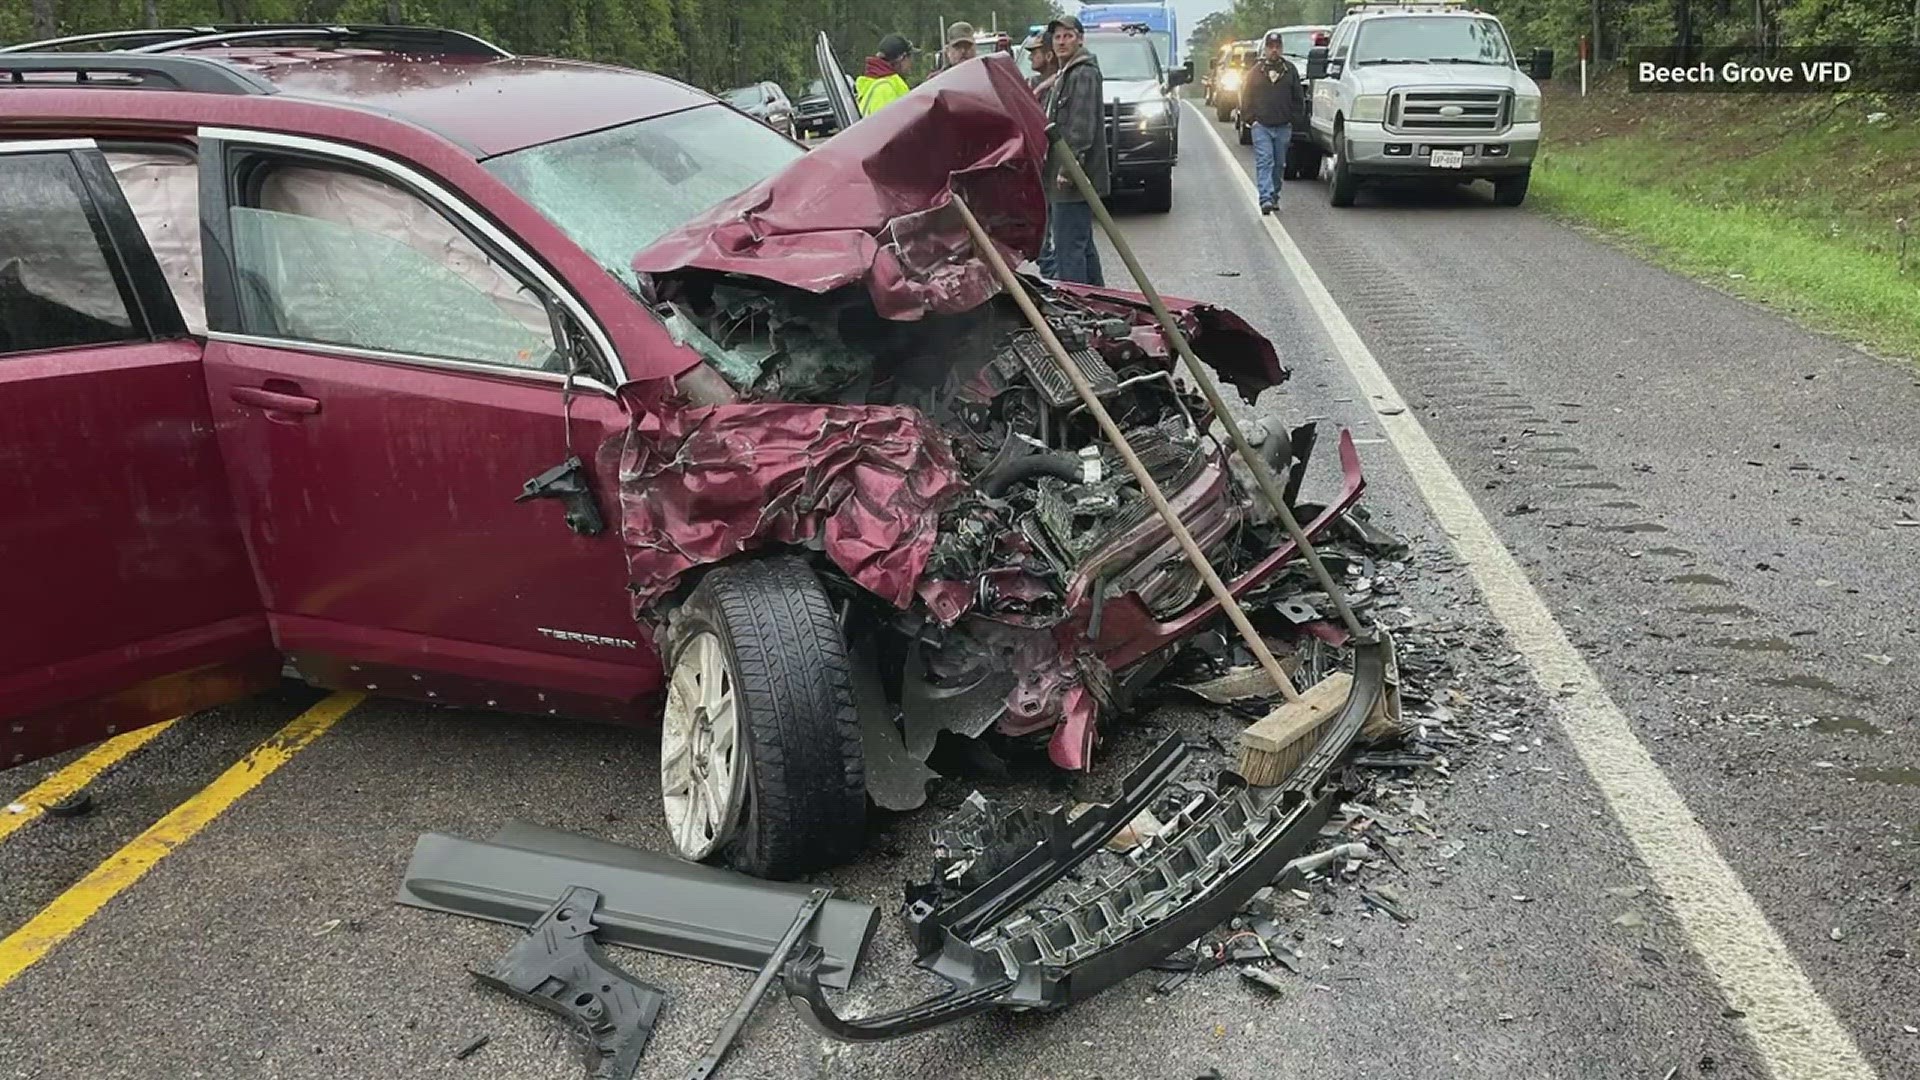 Highway 190 was closed for over an hour while the accident was investigated by the Texas Department of Public Safety and Jasper County Sheriff’s Office.